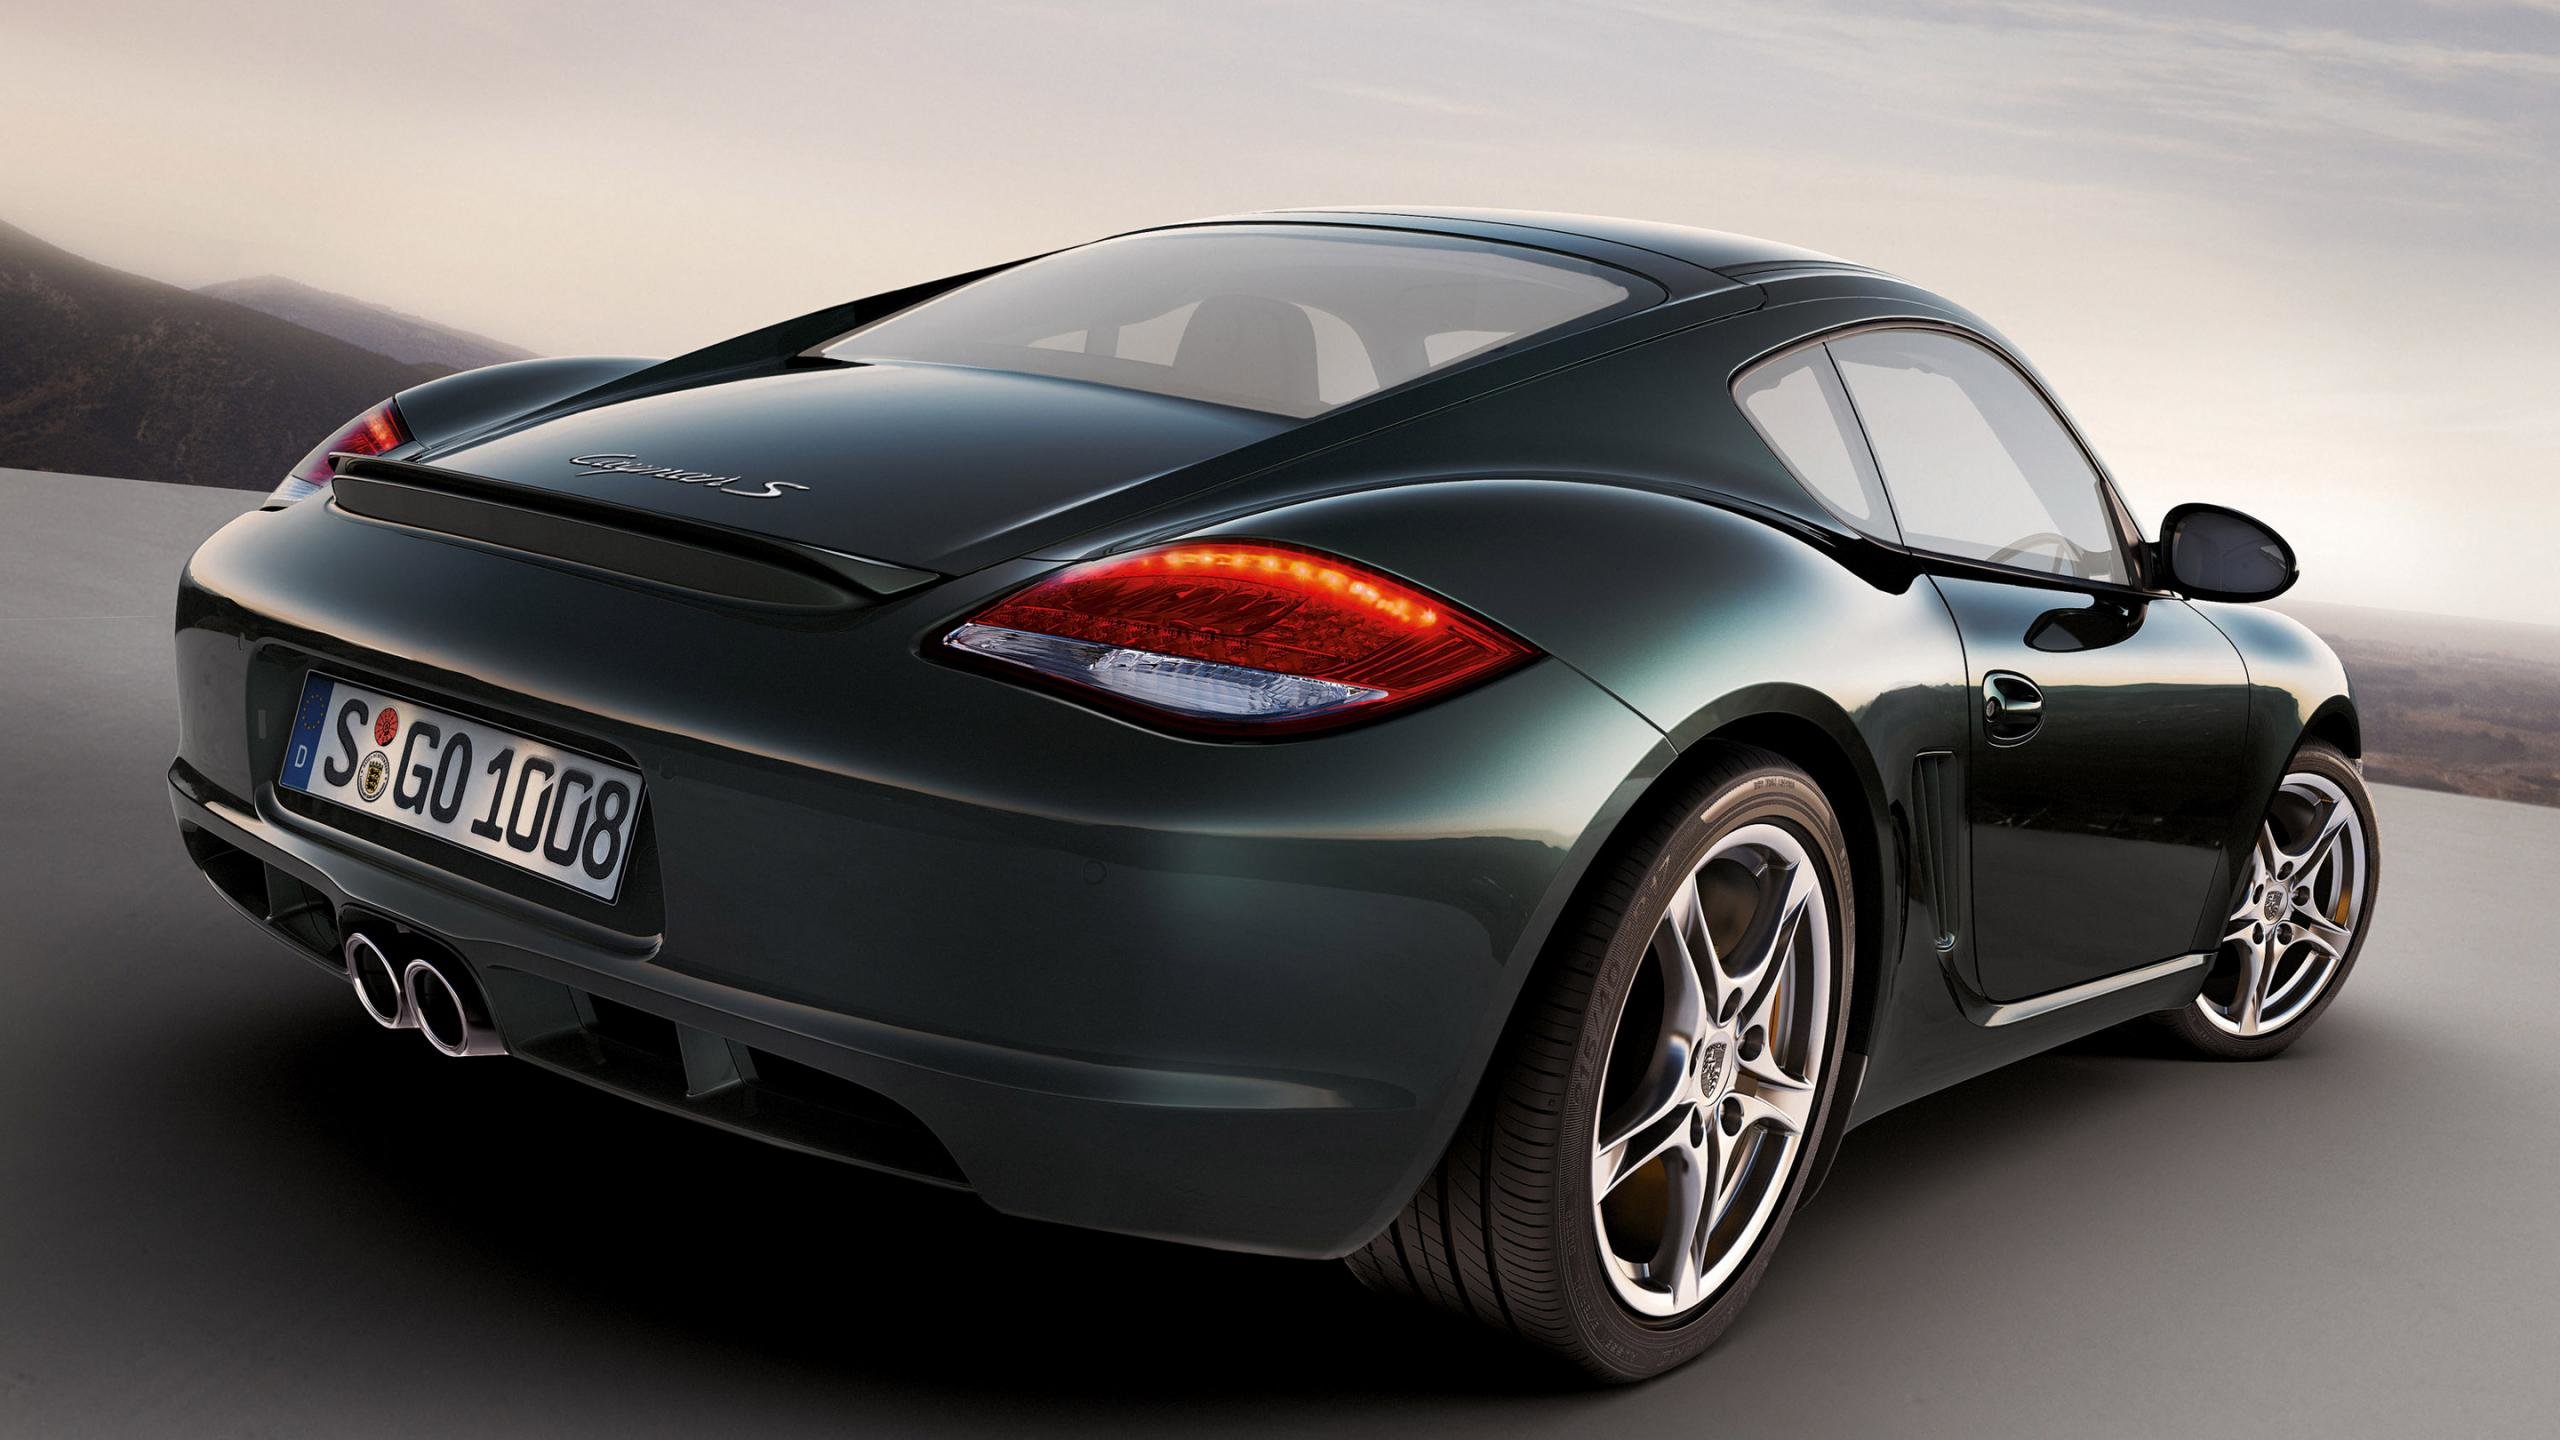 Awesome Porsche Cayman S free wallpaper ID:365909 for hd 2560x1440 computer